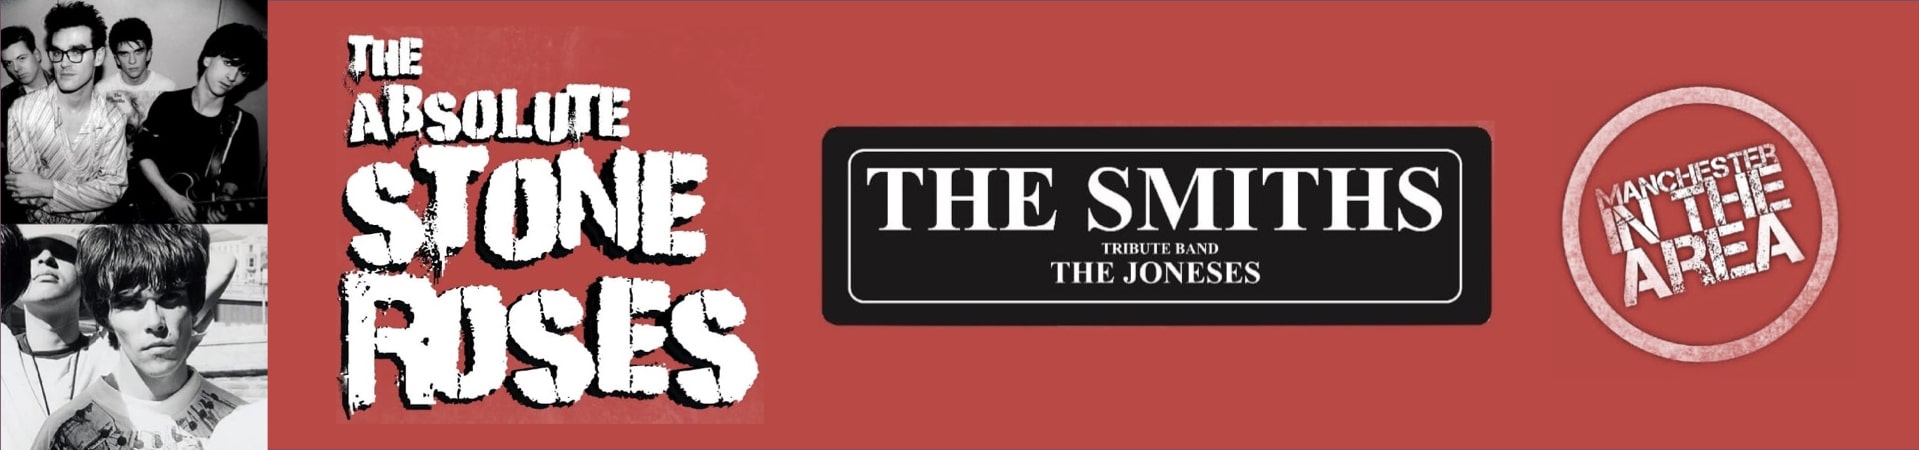 MANCHESTER IN THE AREA – THE ABSOLUTE STONE ROSES – THE SMITHS TRIBUTE THE JONESES